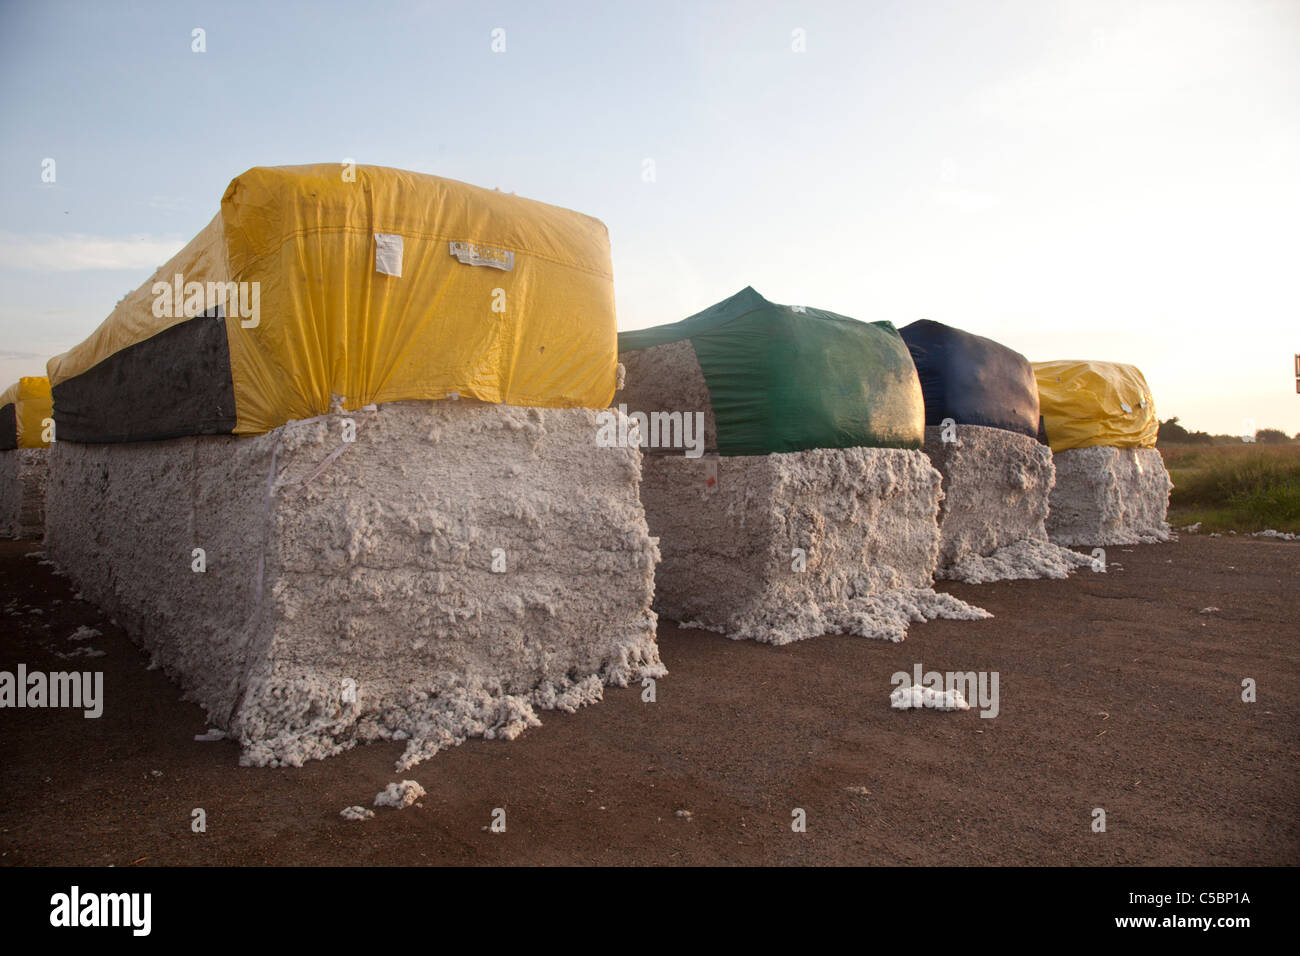 Large cotton bales covered with yellow tarps sit in a cotton field in East Texas. Stock Photo